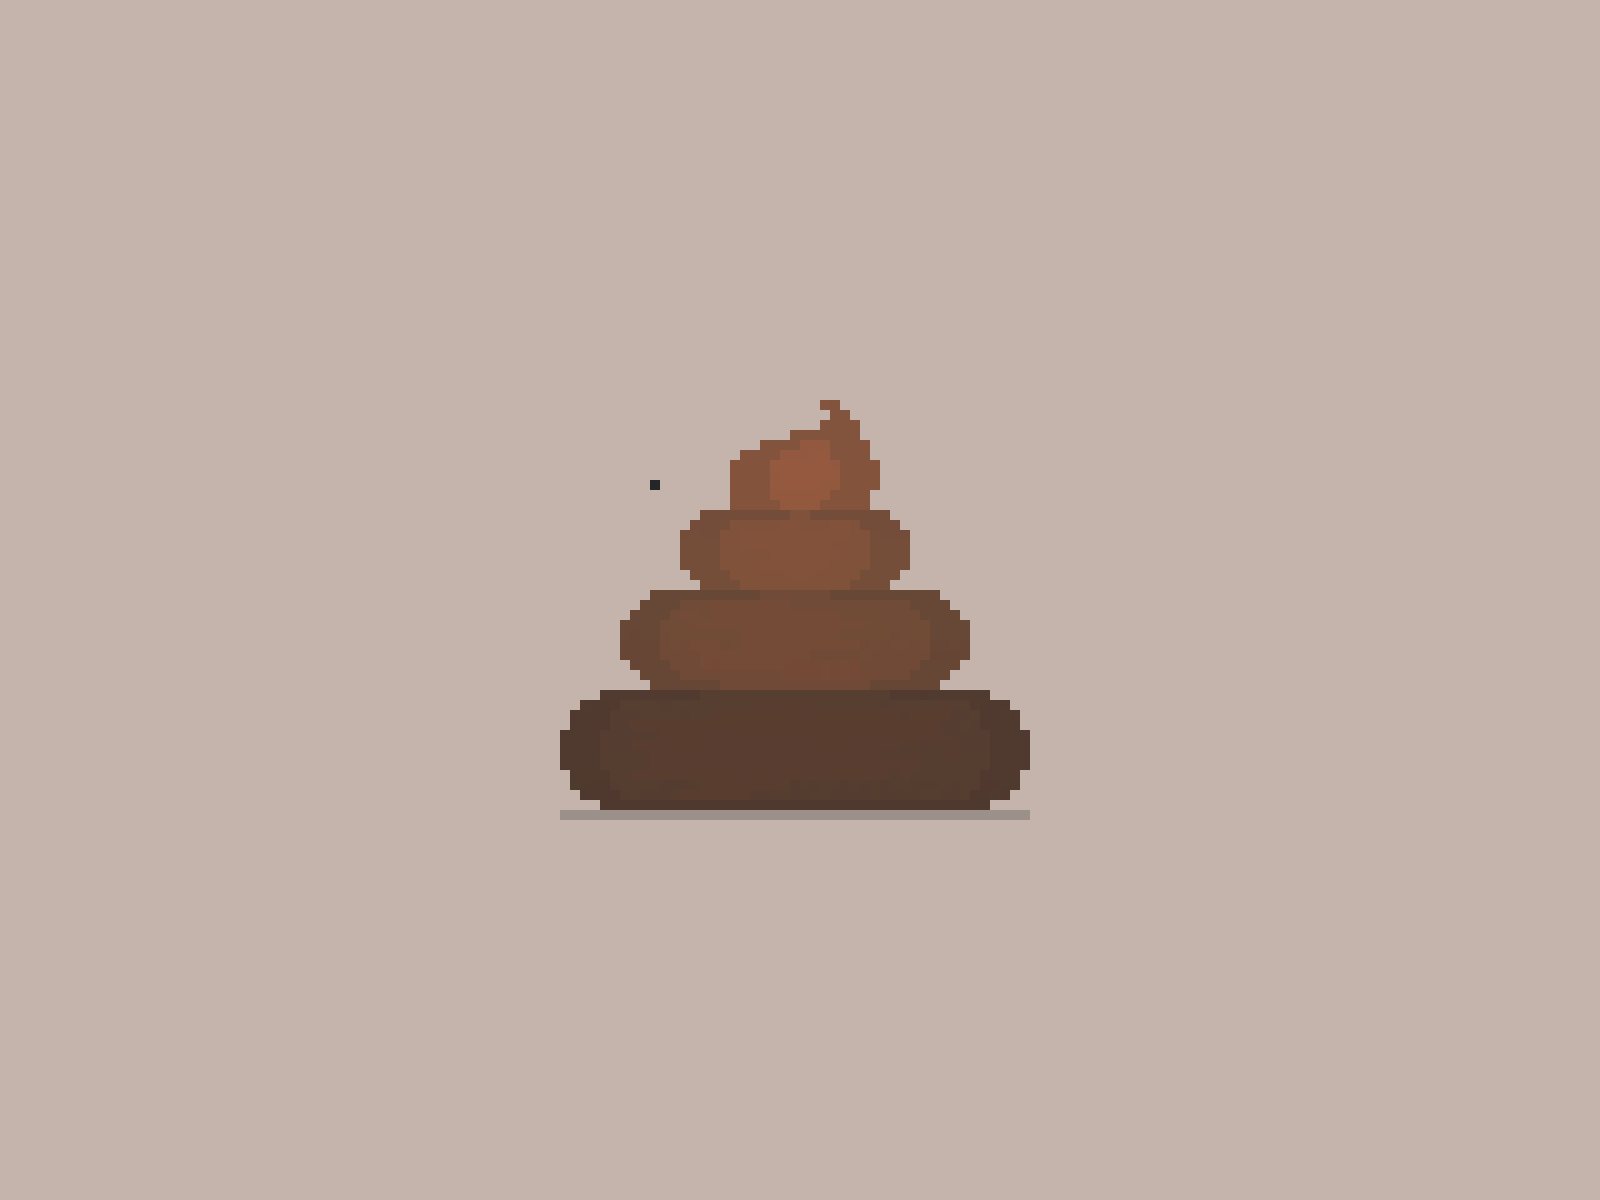 Poop [Pixel Art] animated animation fly flying gif gross pixel pixel art pixelart poop smelly stinky